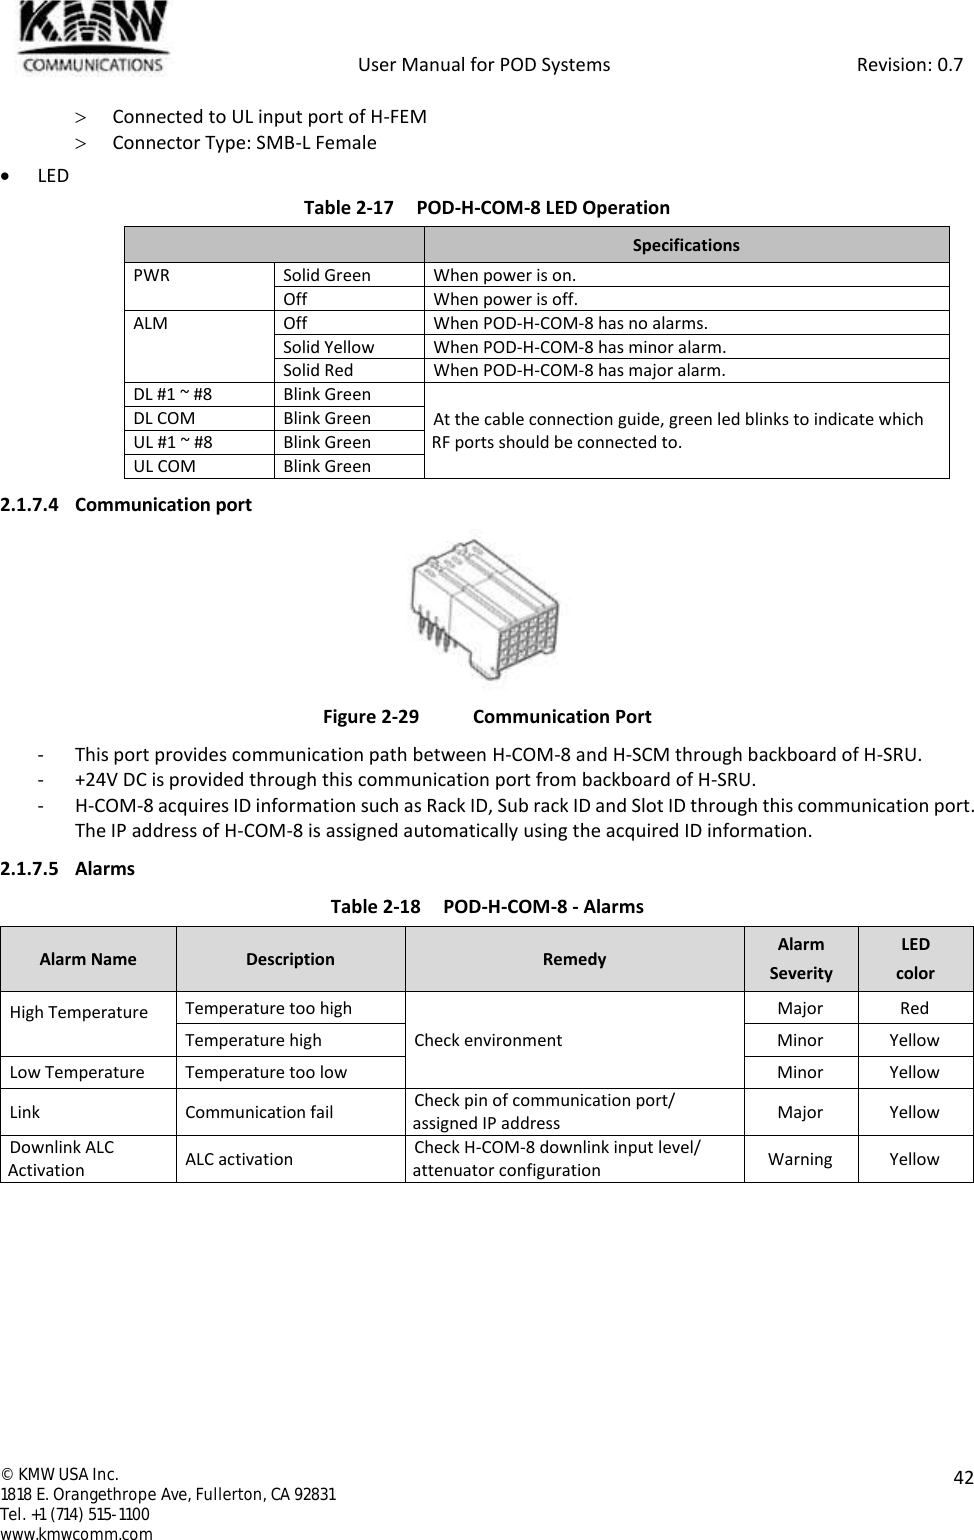            User Manual for POD Systems                                                     Revision: 0.7  ©  KMW USA Inc. 1818 E. Orangethrope Ave, Fullerton, CA 92831 Tel. +1 (714) 515-1100 www.kmwcomm.com  42   Connected to UL input port of H-FEM  Connector Type: SMB-L Female  LED Table 2-17 POD-H-COM-8 LED Operation  Specifications PWR Solid Green When power is on. Off When power is off. ALM Off When POD-H-COM-8 has no alarms. Solid Yellow When POD-H-COM-8 has minor alarm. Solid Red When POD-H-COM-8 has major alarm. DL #1 ~ #8 Blink Green At the cable connection guide, green led blinks to indicate which RF ports should be connected to. DL COM Blink Green UL #1 ~ #8 Blink Green UL COM Blink Green 2.1.7.4 Communication port  Figure 2-29  Communication Port - This port provides communication path between H-COM-8 and H-SCM through backboard of H-SRU. - +24V DC is provided through this communication port from backboard of H-SRU. - H-COM-8 acquires ID information such as Rack ID, Sub rack ID and Slot ID through this communication port. The IP address of H-COM-8 is assigned automatically using the acquired ID information. 2.1.7.5 Alarms Table 2-18 POD-H-COM-8 - Alarms Alarm Name Description Remedy Alarm Severity LED color High Temperature  Temperature too high Check environment Major Red Temperature high Minor Yellow Low Temperature Temperature too low Minor Yellow Link Communication fail Check pin of communication port/ assigned IP address Major Yellow Downlink ALC Activation ALC activation Check H-COM-8 downlink input level/ attenuator configuration Warning Yellow    